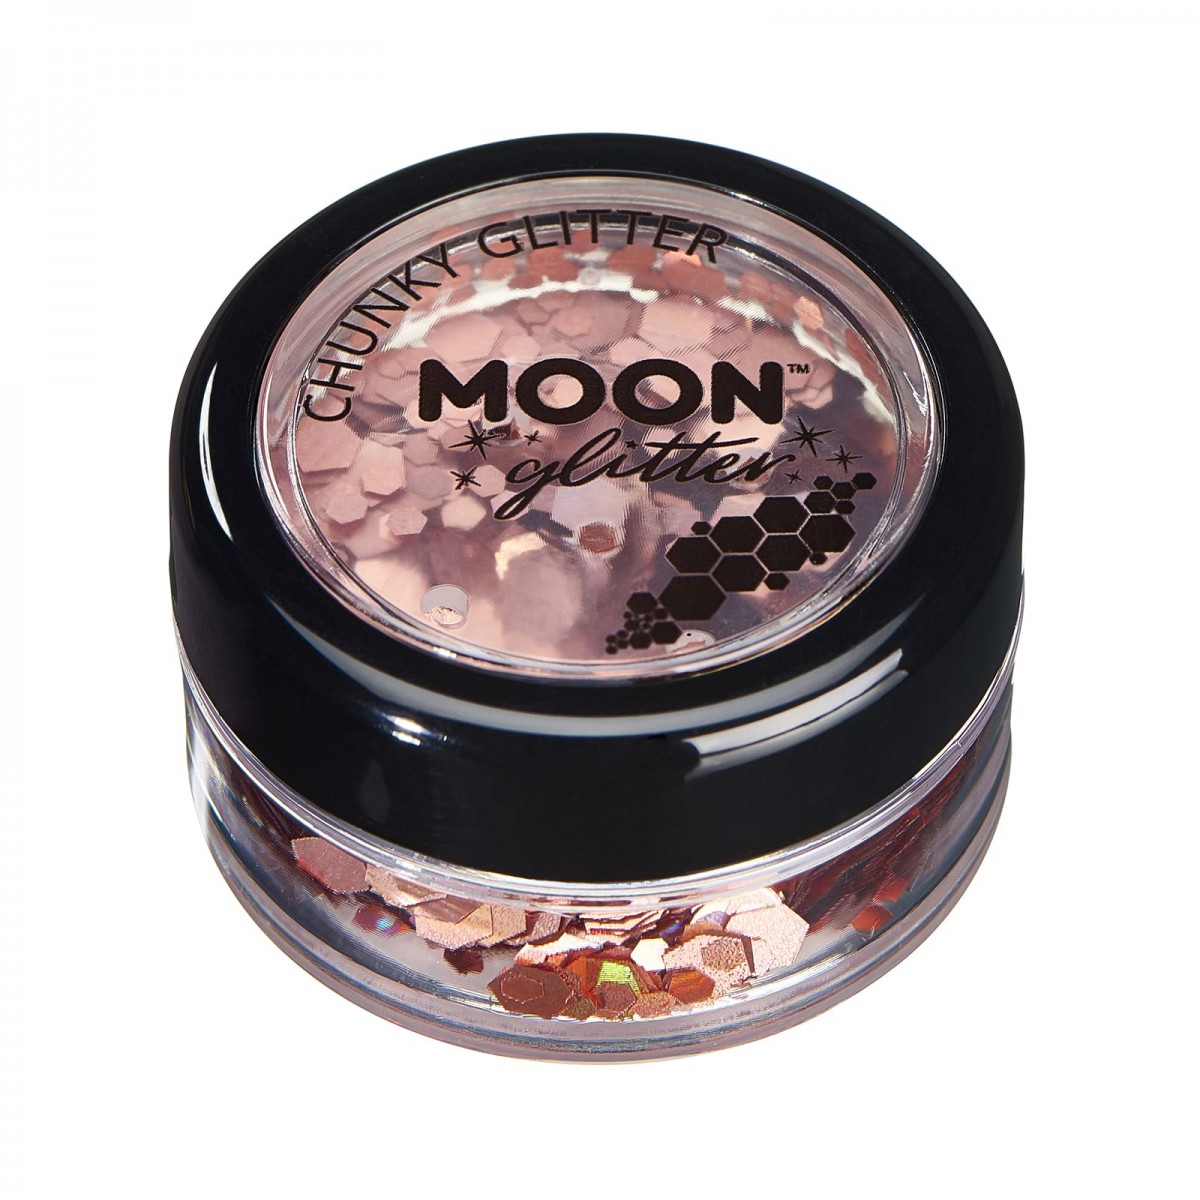 MOON CREATIONS G4 HOLOGRAPHIC CHUNKY GLITTER ROSE GOLD 3g